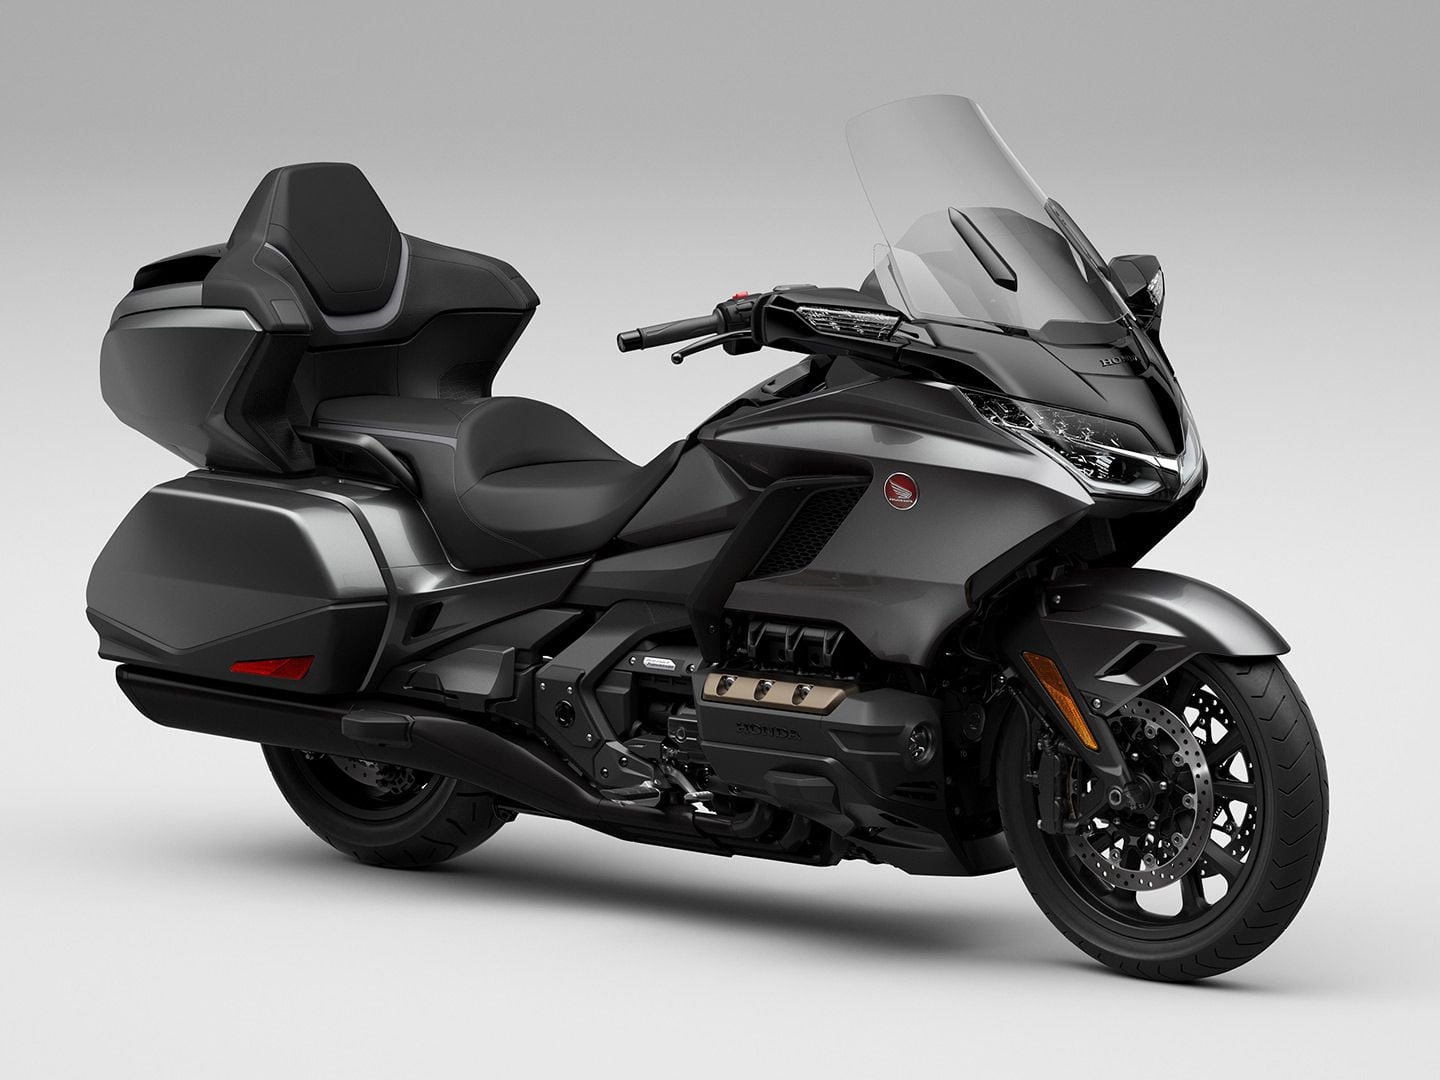 The Gold Wing Tour returns with both DCT and manual transmission options and will get this Gray Metallic color.